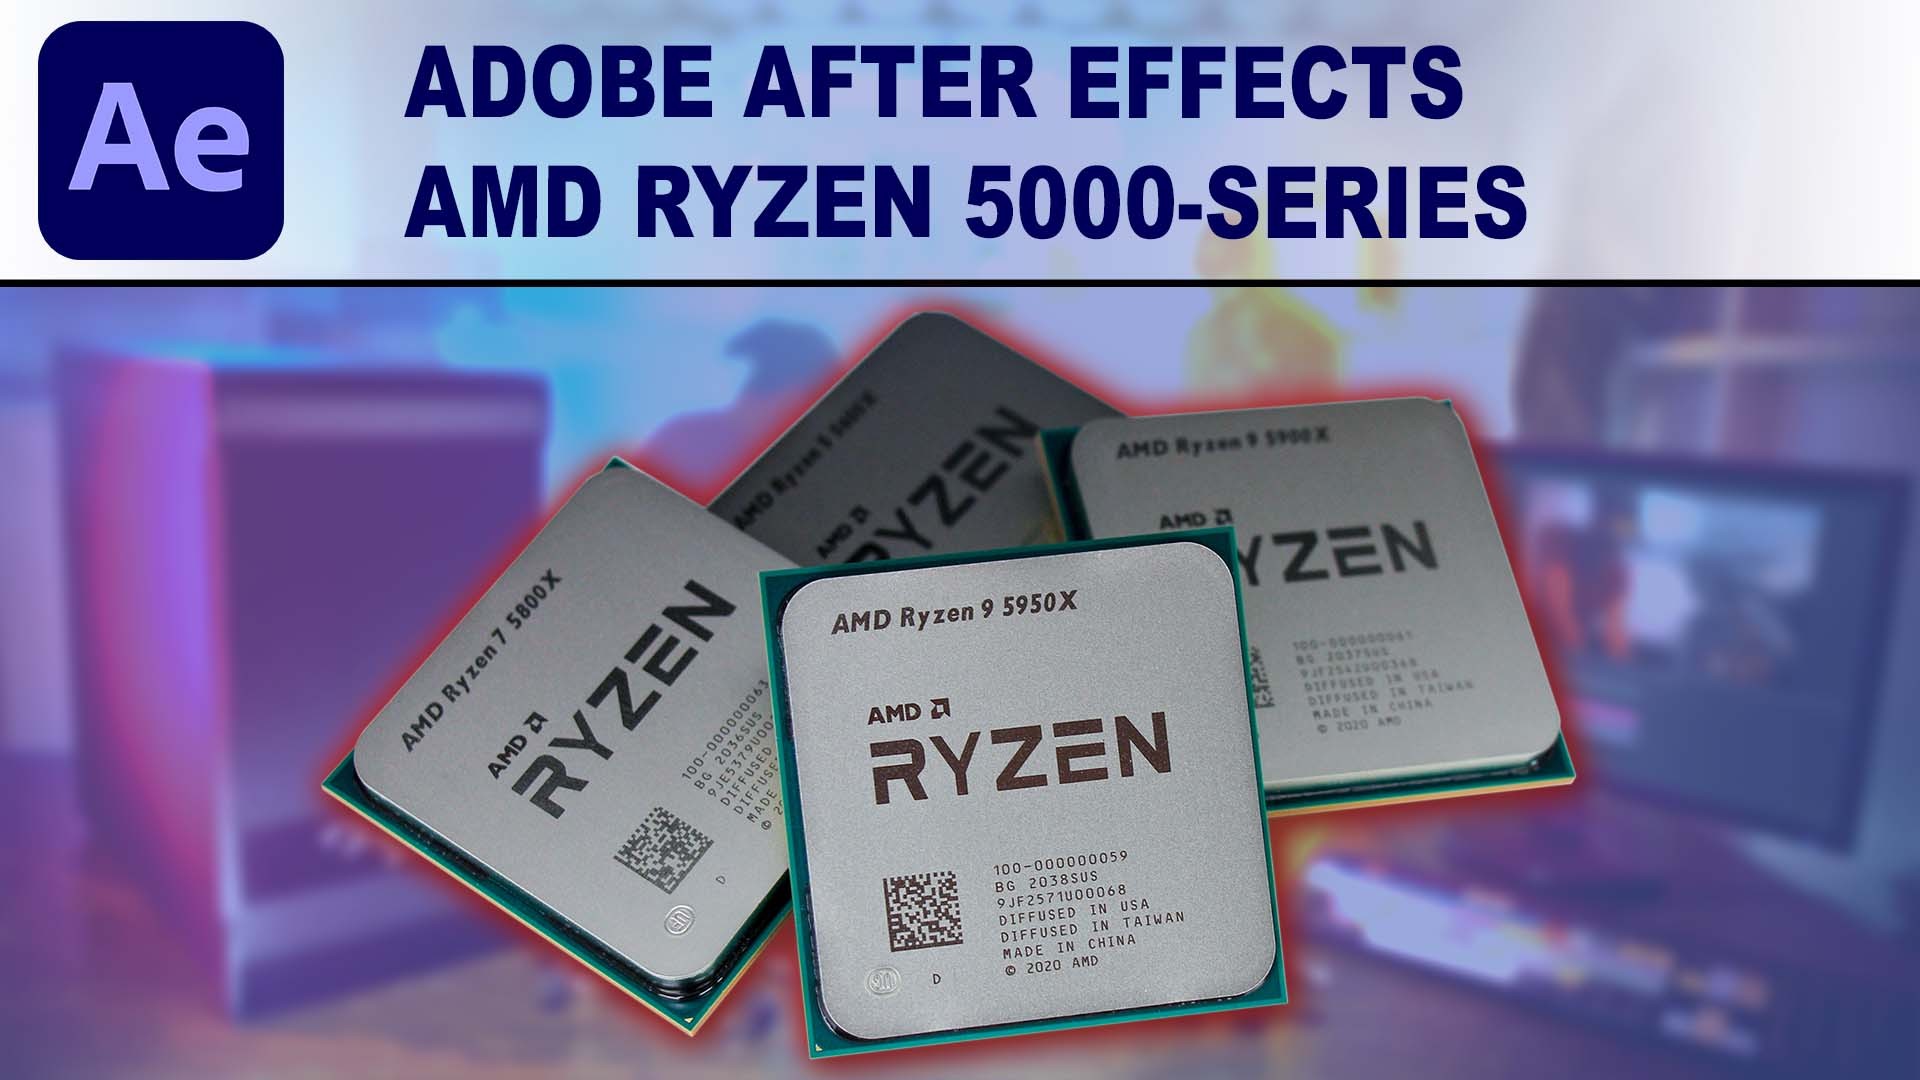 AMD Ryzen 5000-series for Adobe After Effects